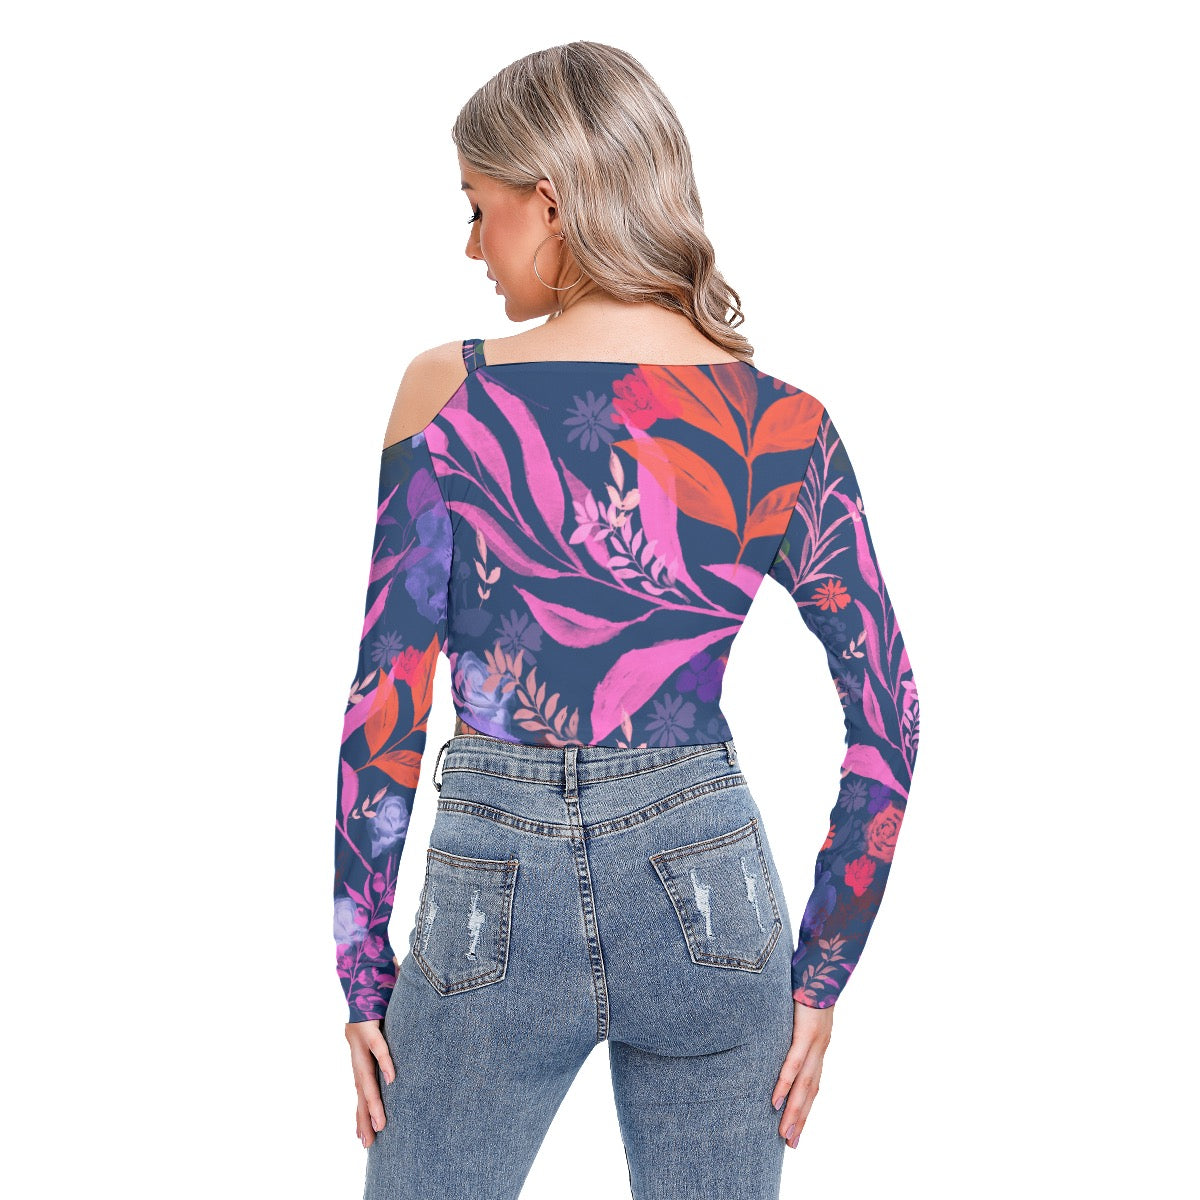 Multicolor flowers Blue Women's One-shoulder Blouse With Drawstring. Houston Collection. Design hand-painted by the Designer Maria Alejandra Echenique